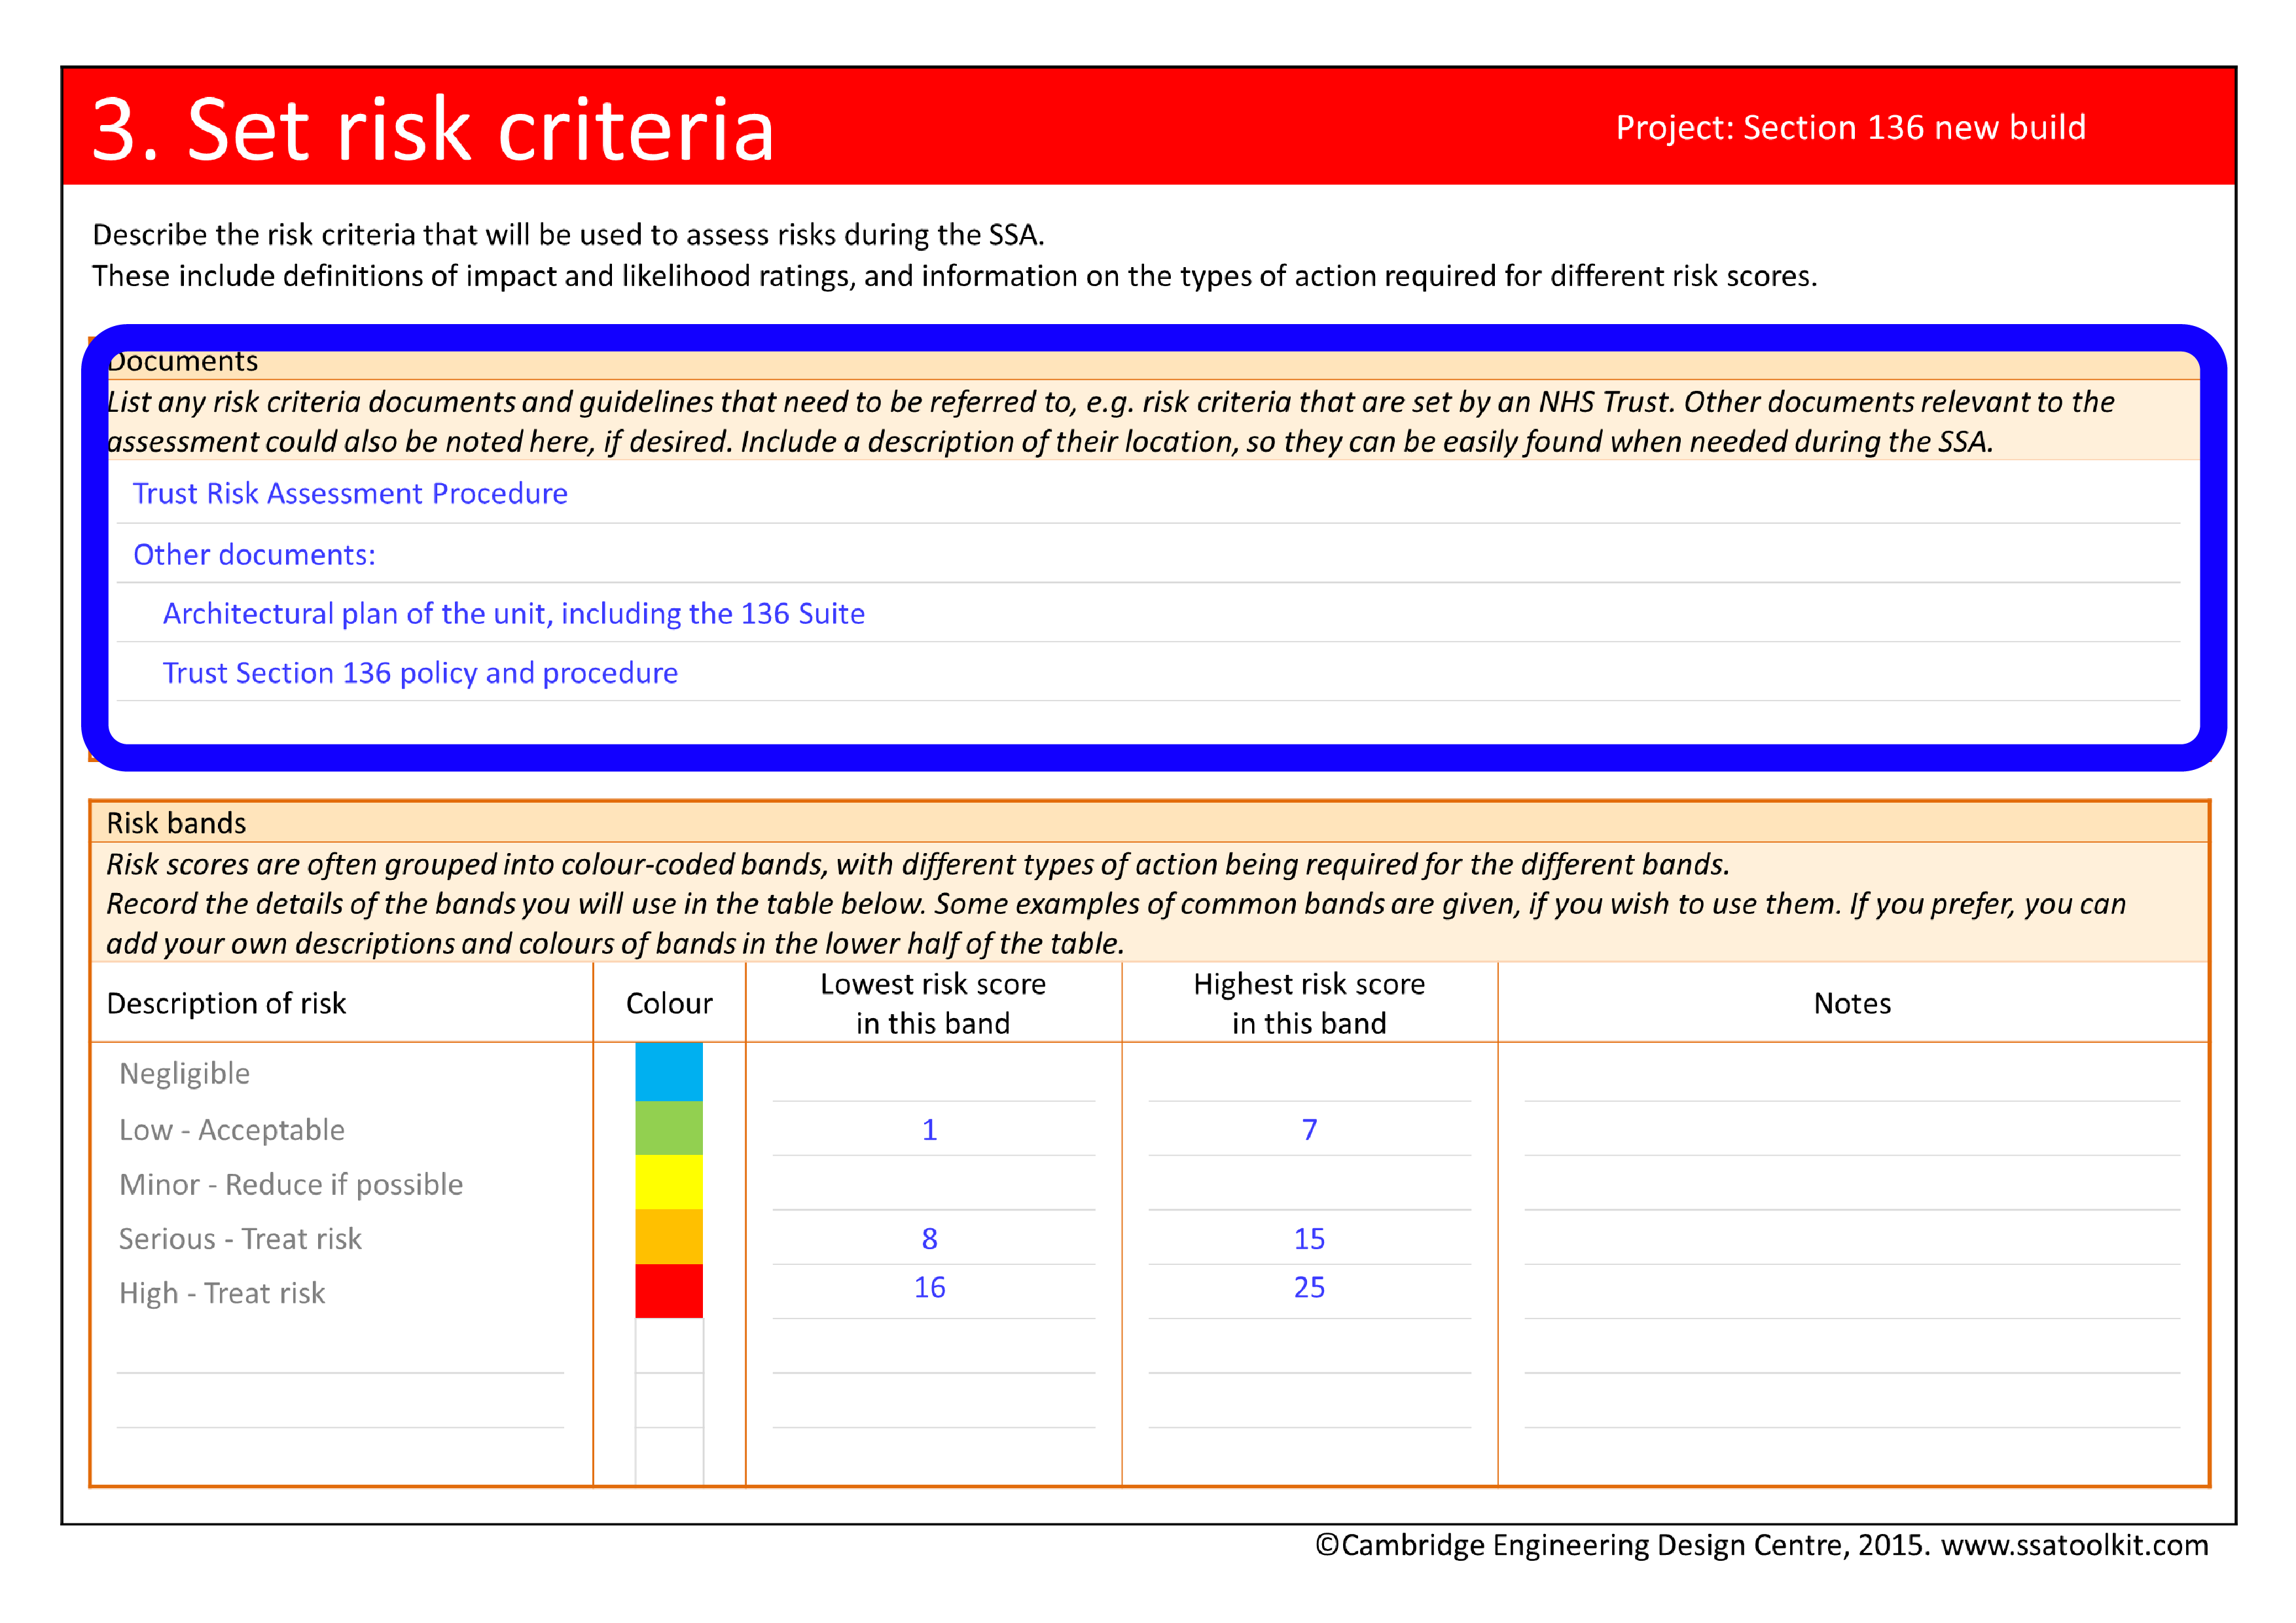 Screenshot of the Set risk criteria page from the Section 136 case study. The full form in pdf is available from the Resources page.